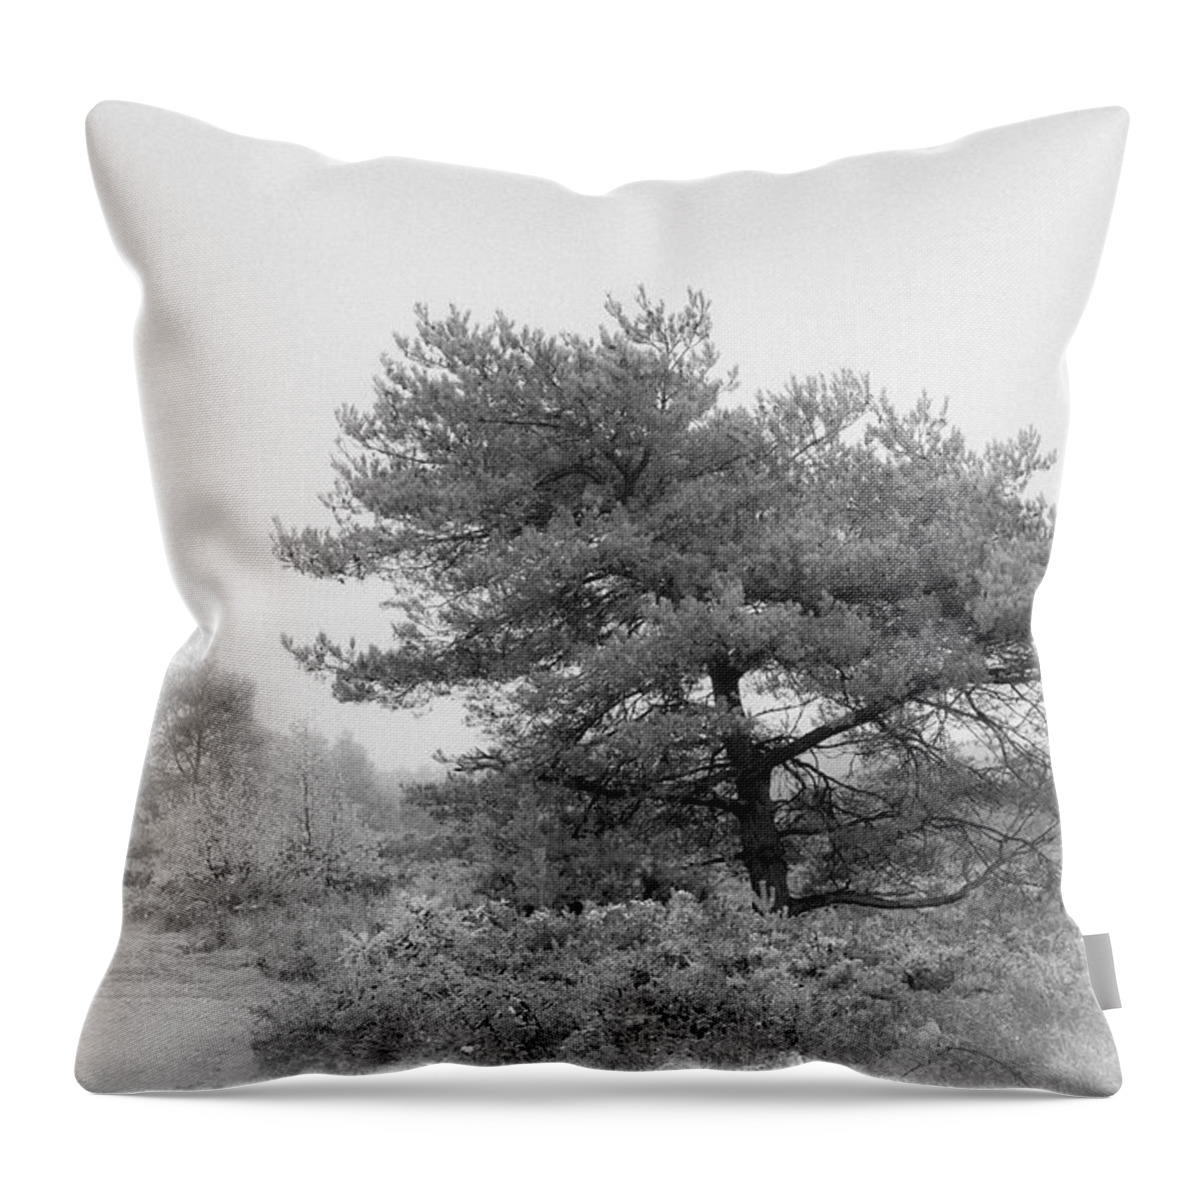 Misty Throw Pillow featuring the photograph Misty by Tanya C Smith